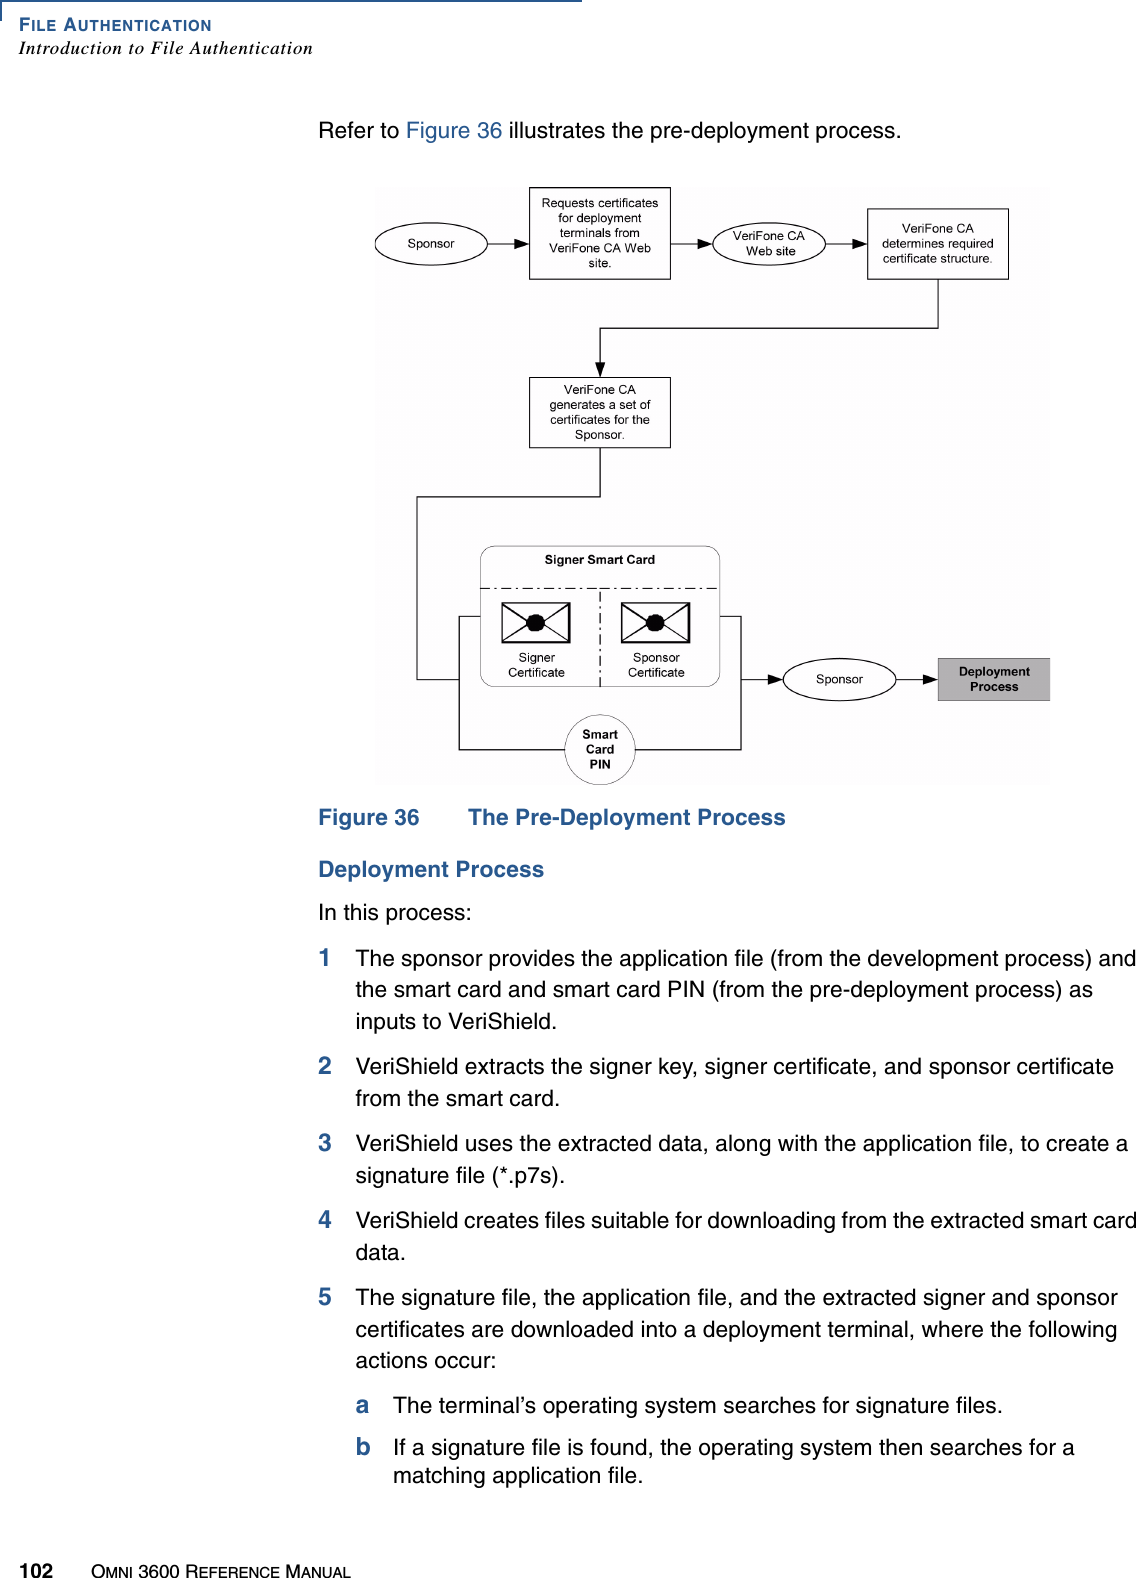 FILE AUTHENTICATIONIntroduction to File Authentication102 OMNI 3600 REFERENCE MANUALRefer to Figure 36 illustrates the pre-deployment process.Figure 36 The Pre-Deployment ProcessDeployment ProcessIn this process:1The sponsor provides the application file (from the development process) and the smart card and smart card PIN (from the pre-deployment process) as inputs to VeriShield.2VeriShield extracts the signer key, signer certificate, and sponsor certificate from the smart card.3VeriShield uses the extracted data, along with the application file, to create a signature file (*.p7s).4VeriShield creates files suitable for downloading from the extracted smart card data.5The signature file, the application file, and the extracted signer and sponsor certificates are downloaded into a deployment terminal, where the following actions occur:aThe terminal’s operating system searches for signature files.bIf a signature file is found, the operating system then searches for a matching application file.